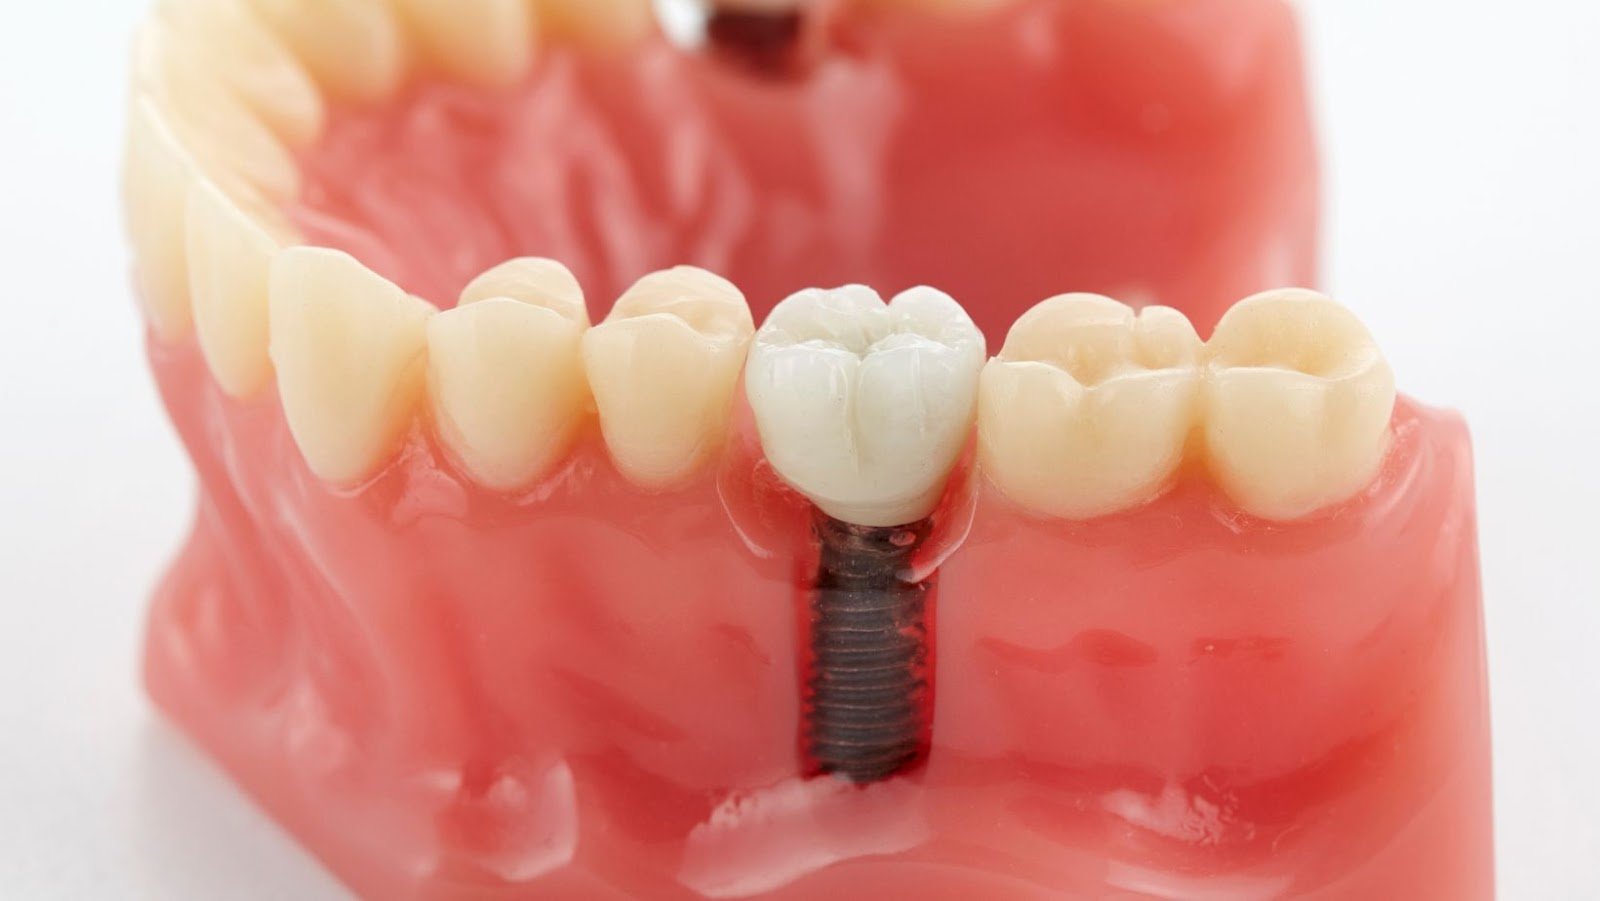 Tips for Looking After Your Dental Implants